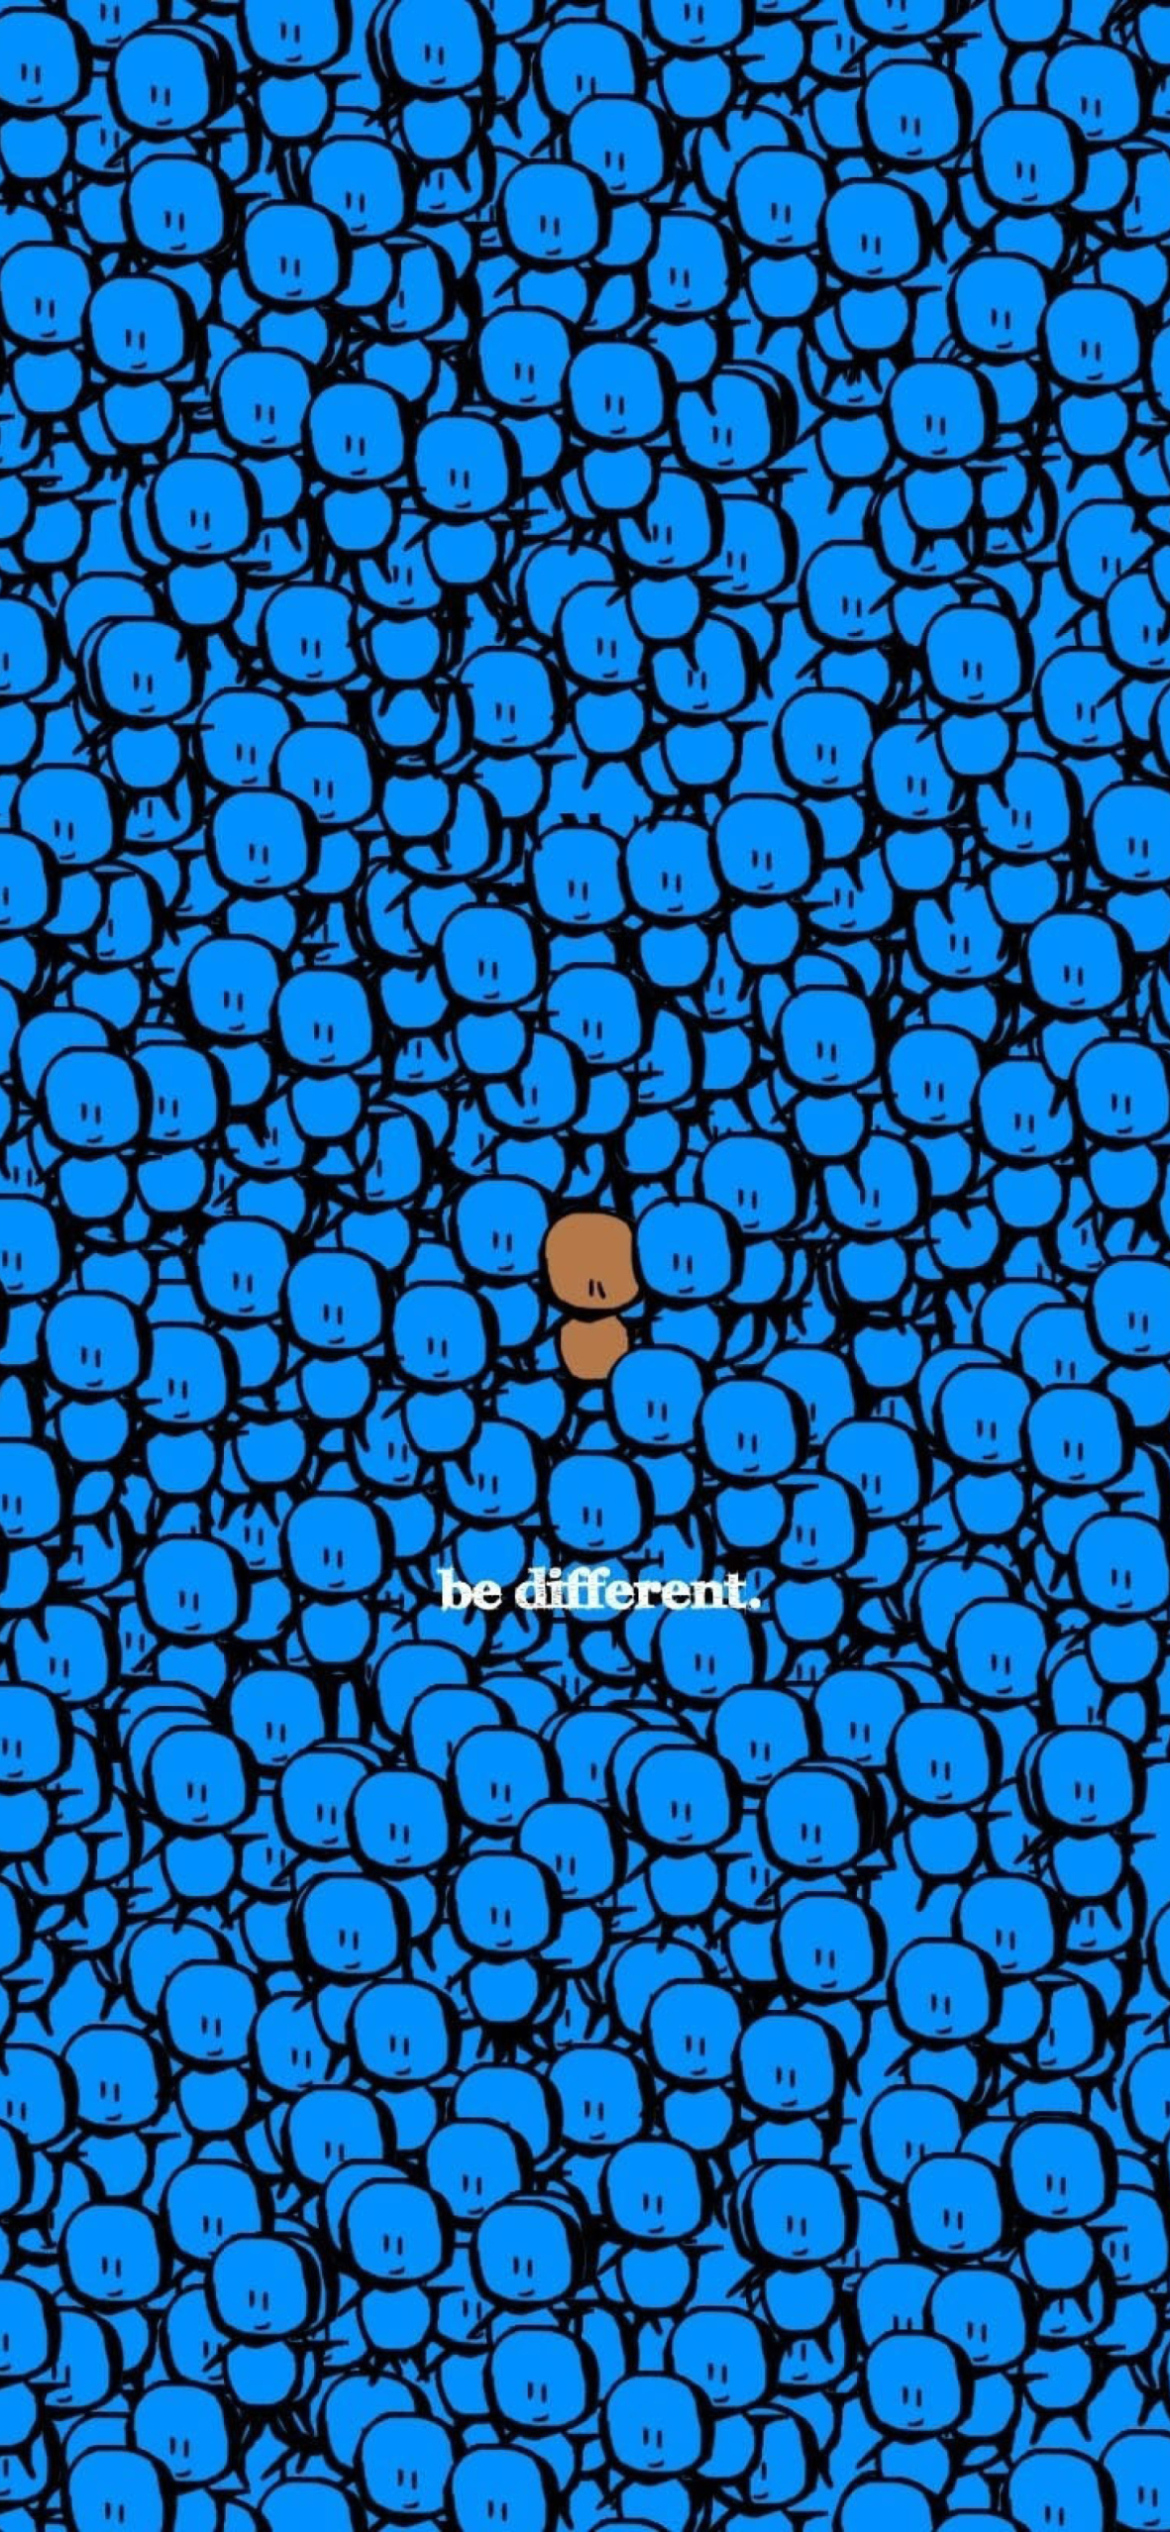 Be Different wallpaper 1170x2532